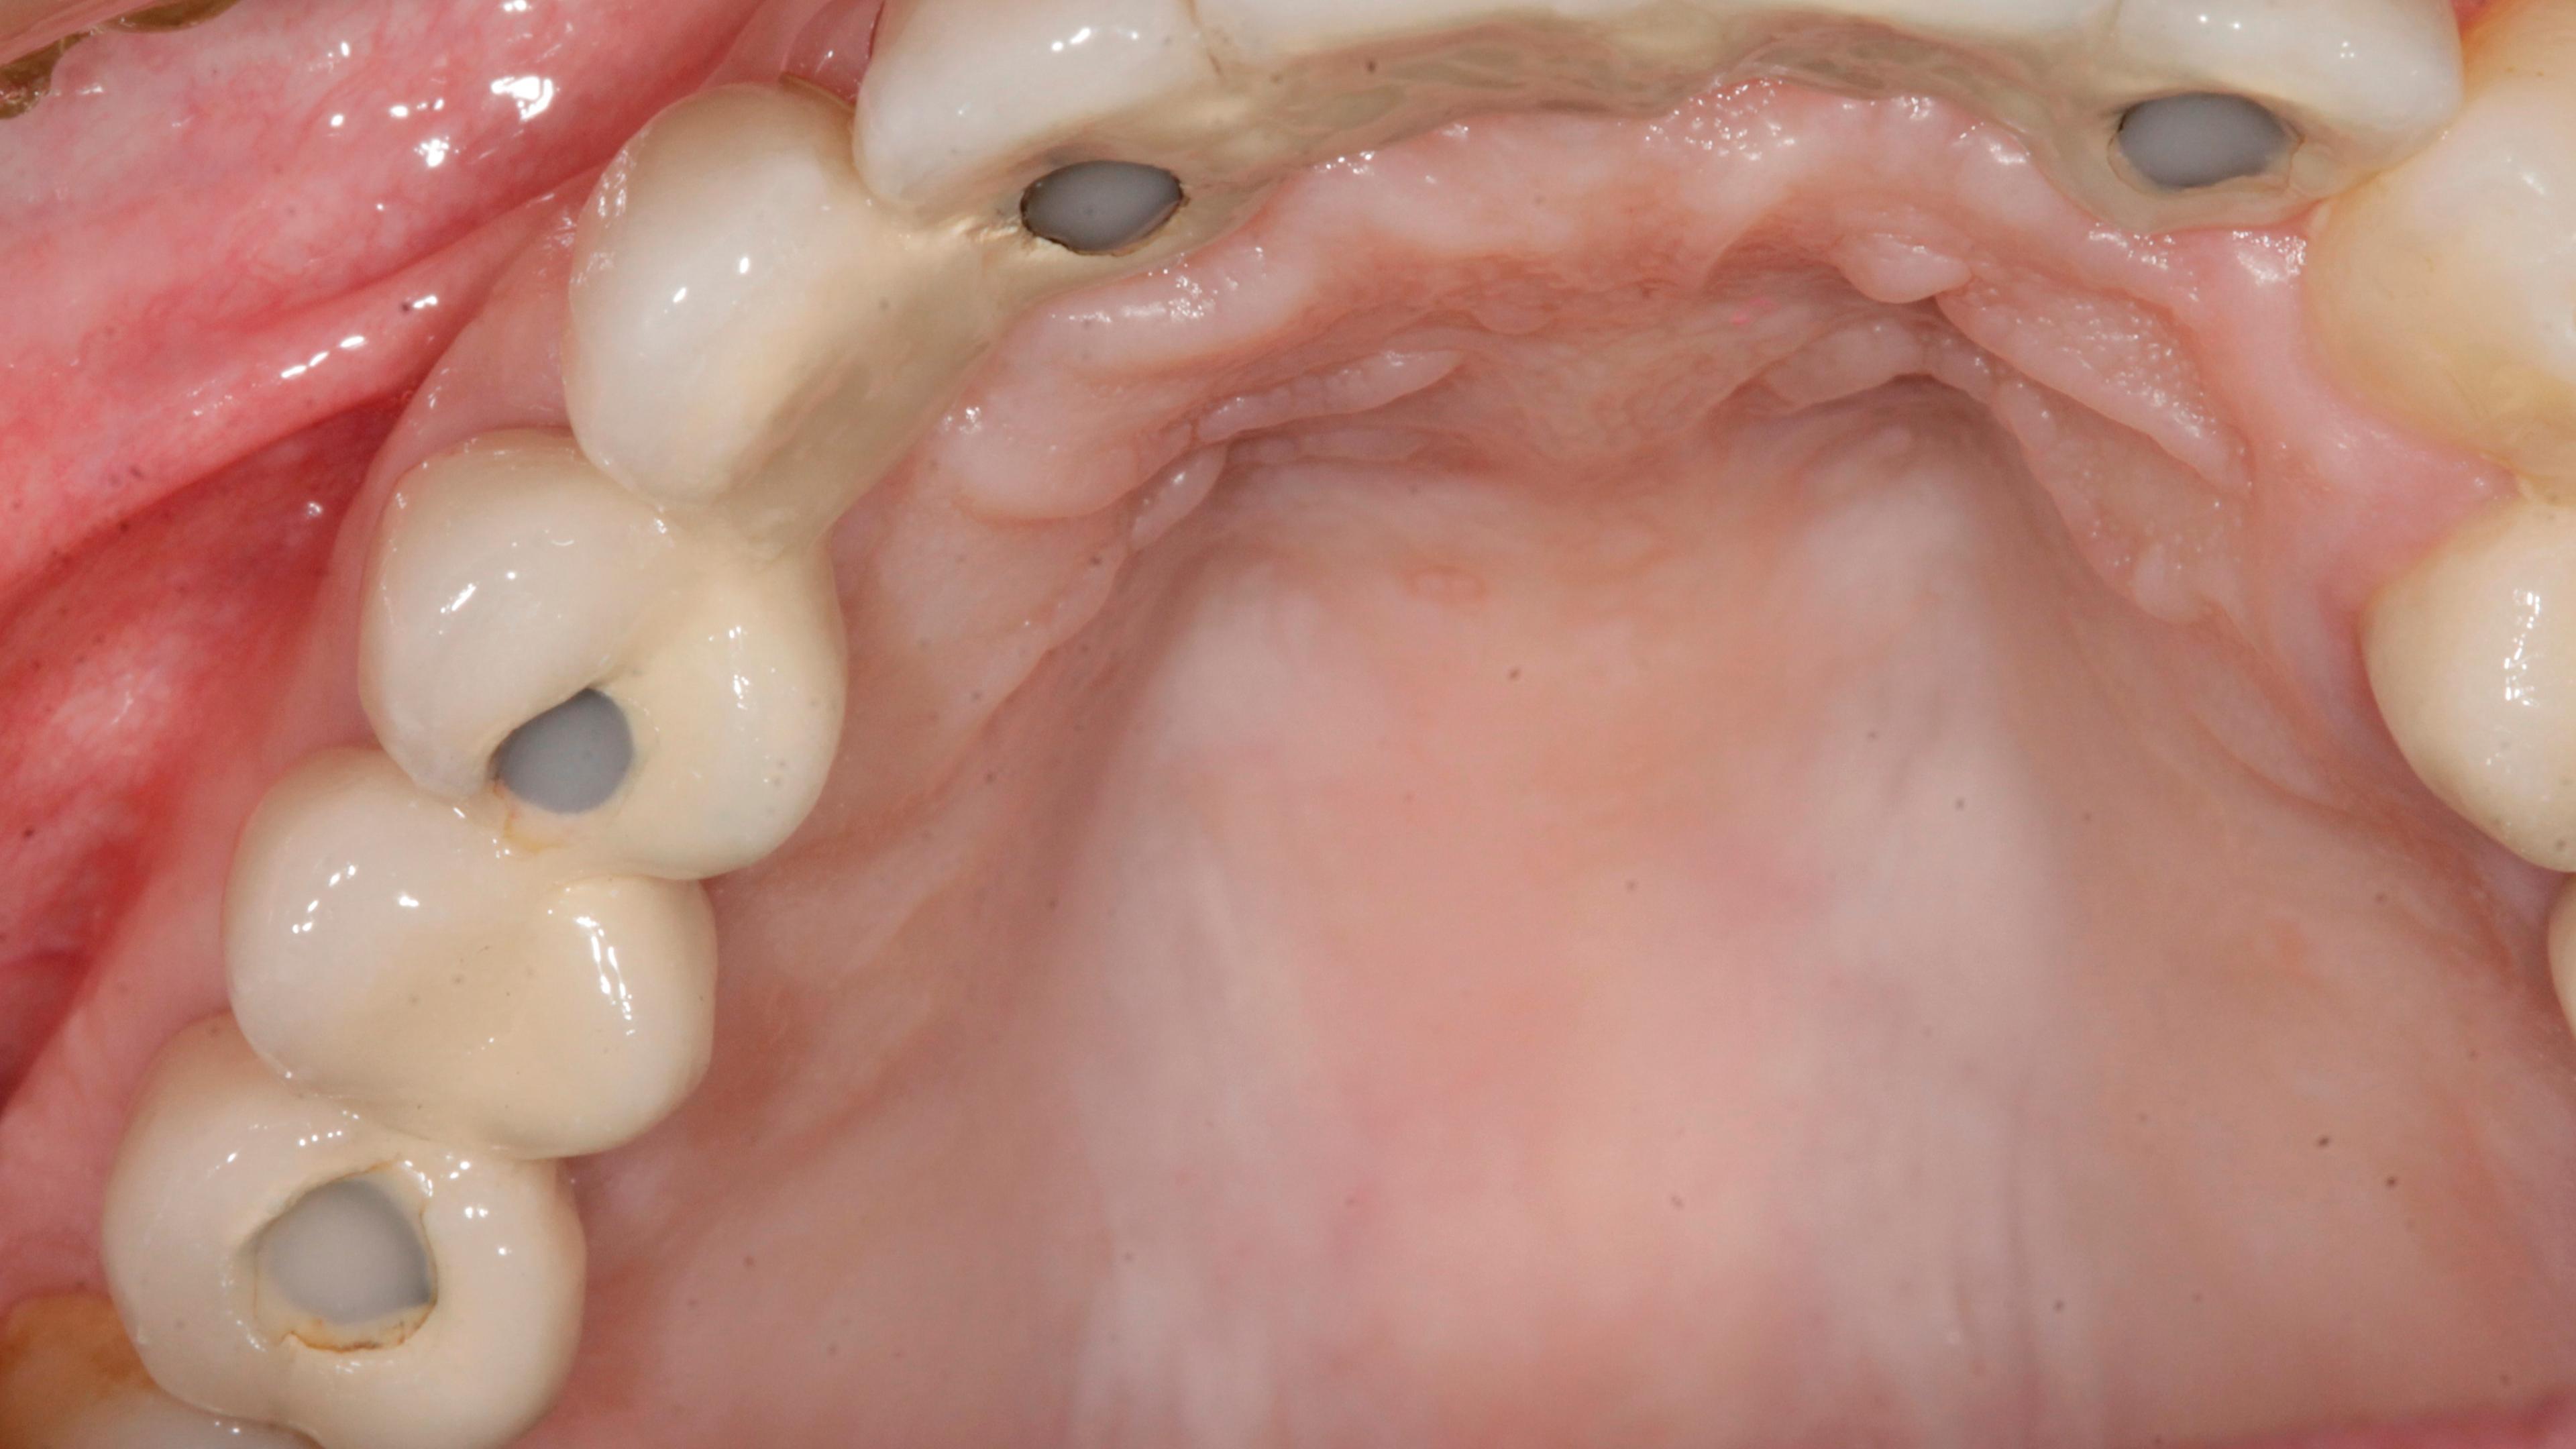 Partial edentulism After treatment - Missing more than one teeth